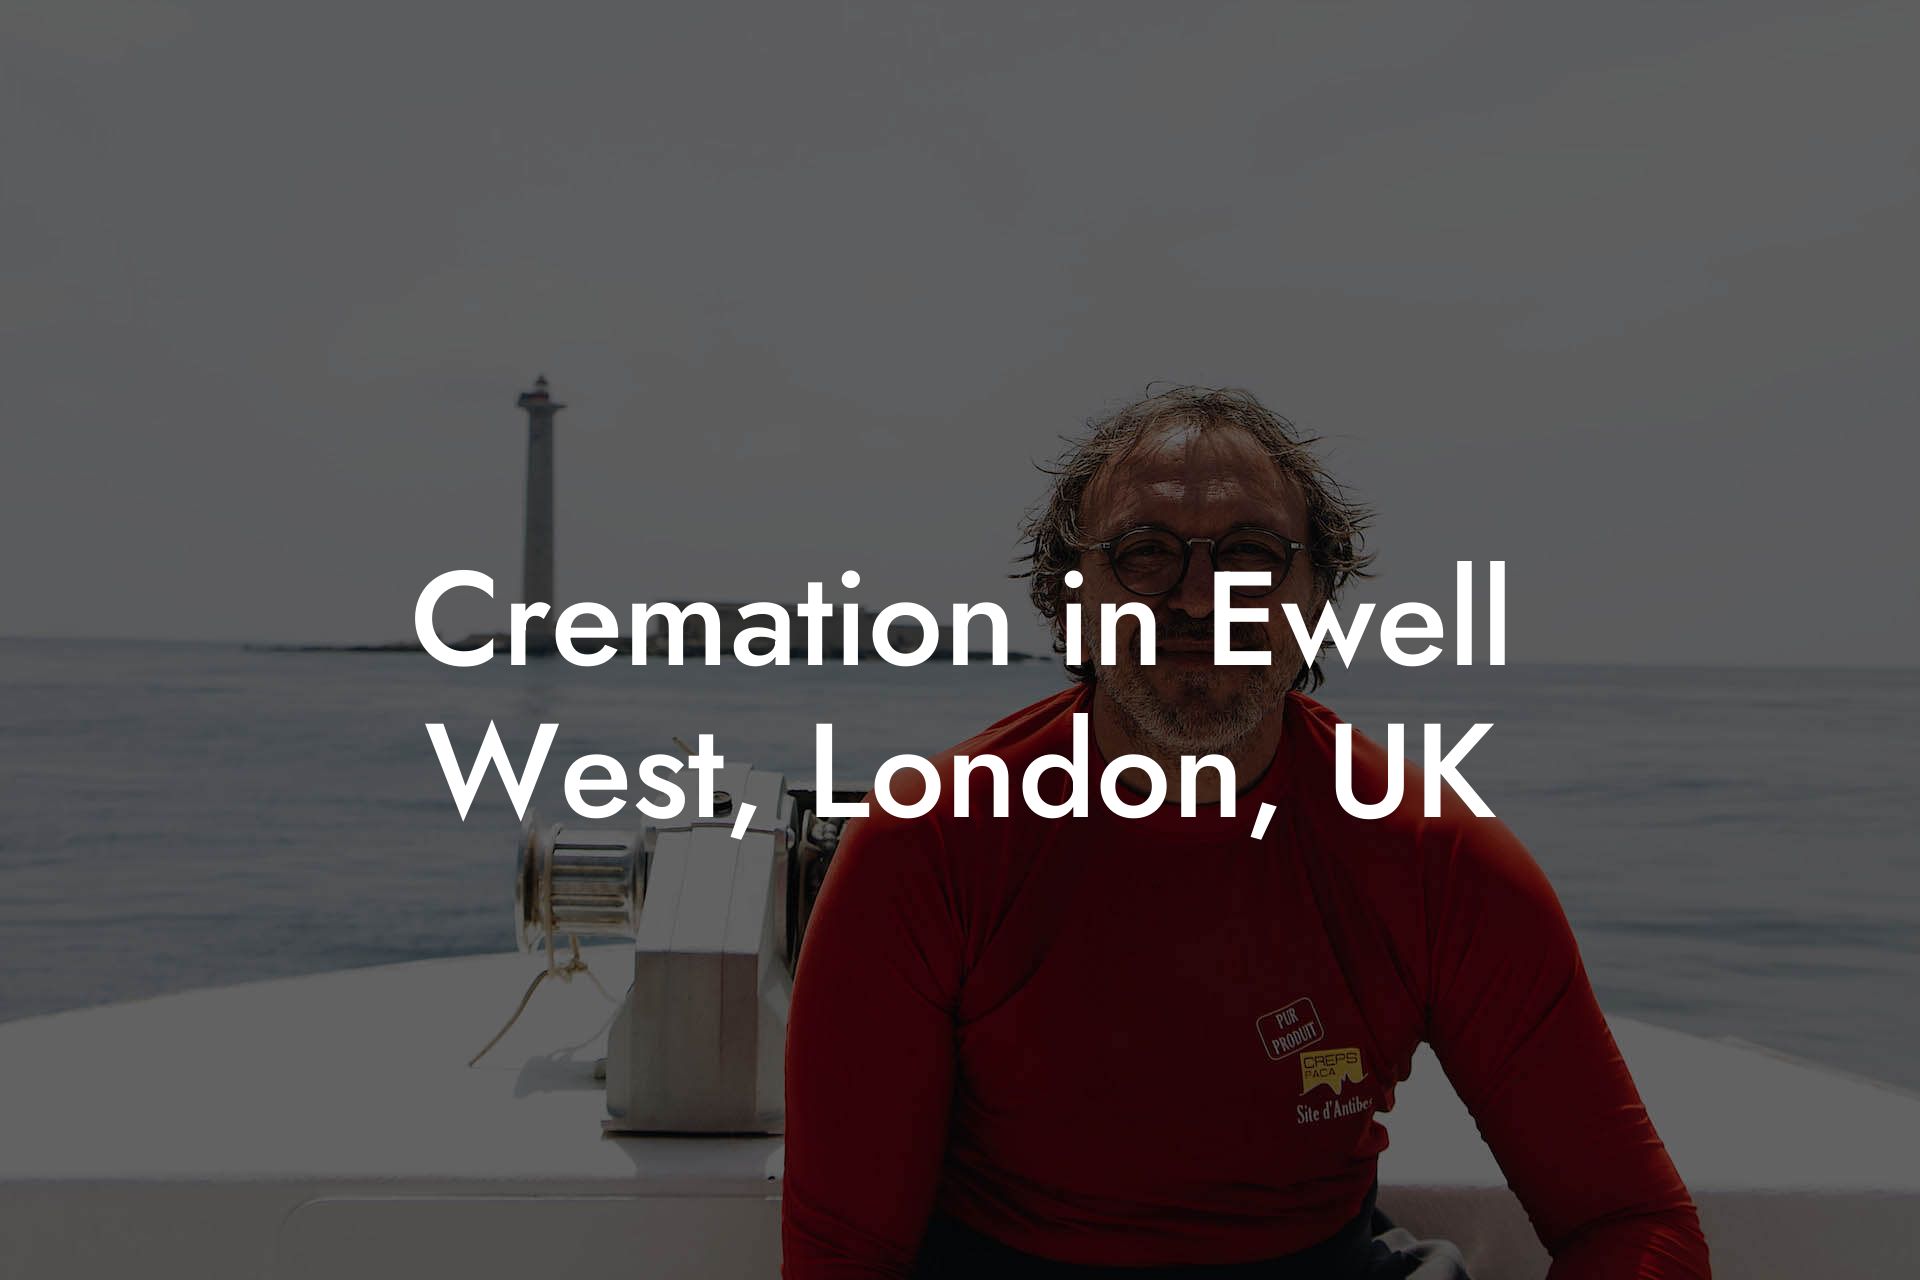 Cremation in Ewell West, London, UK